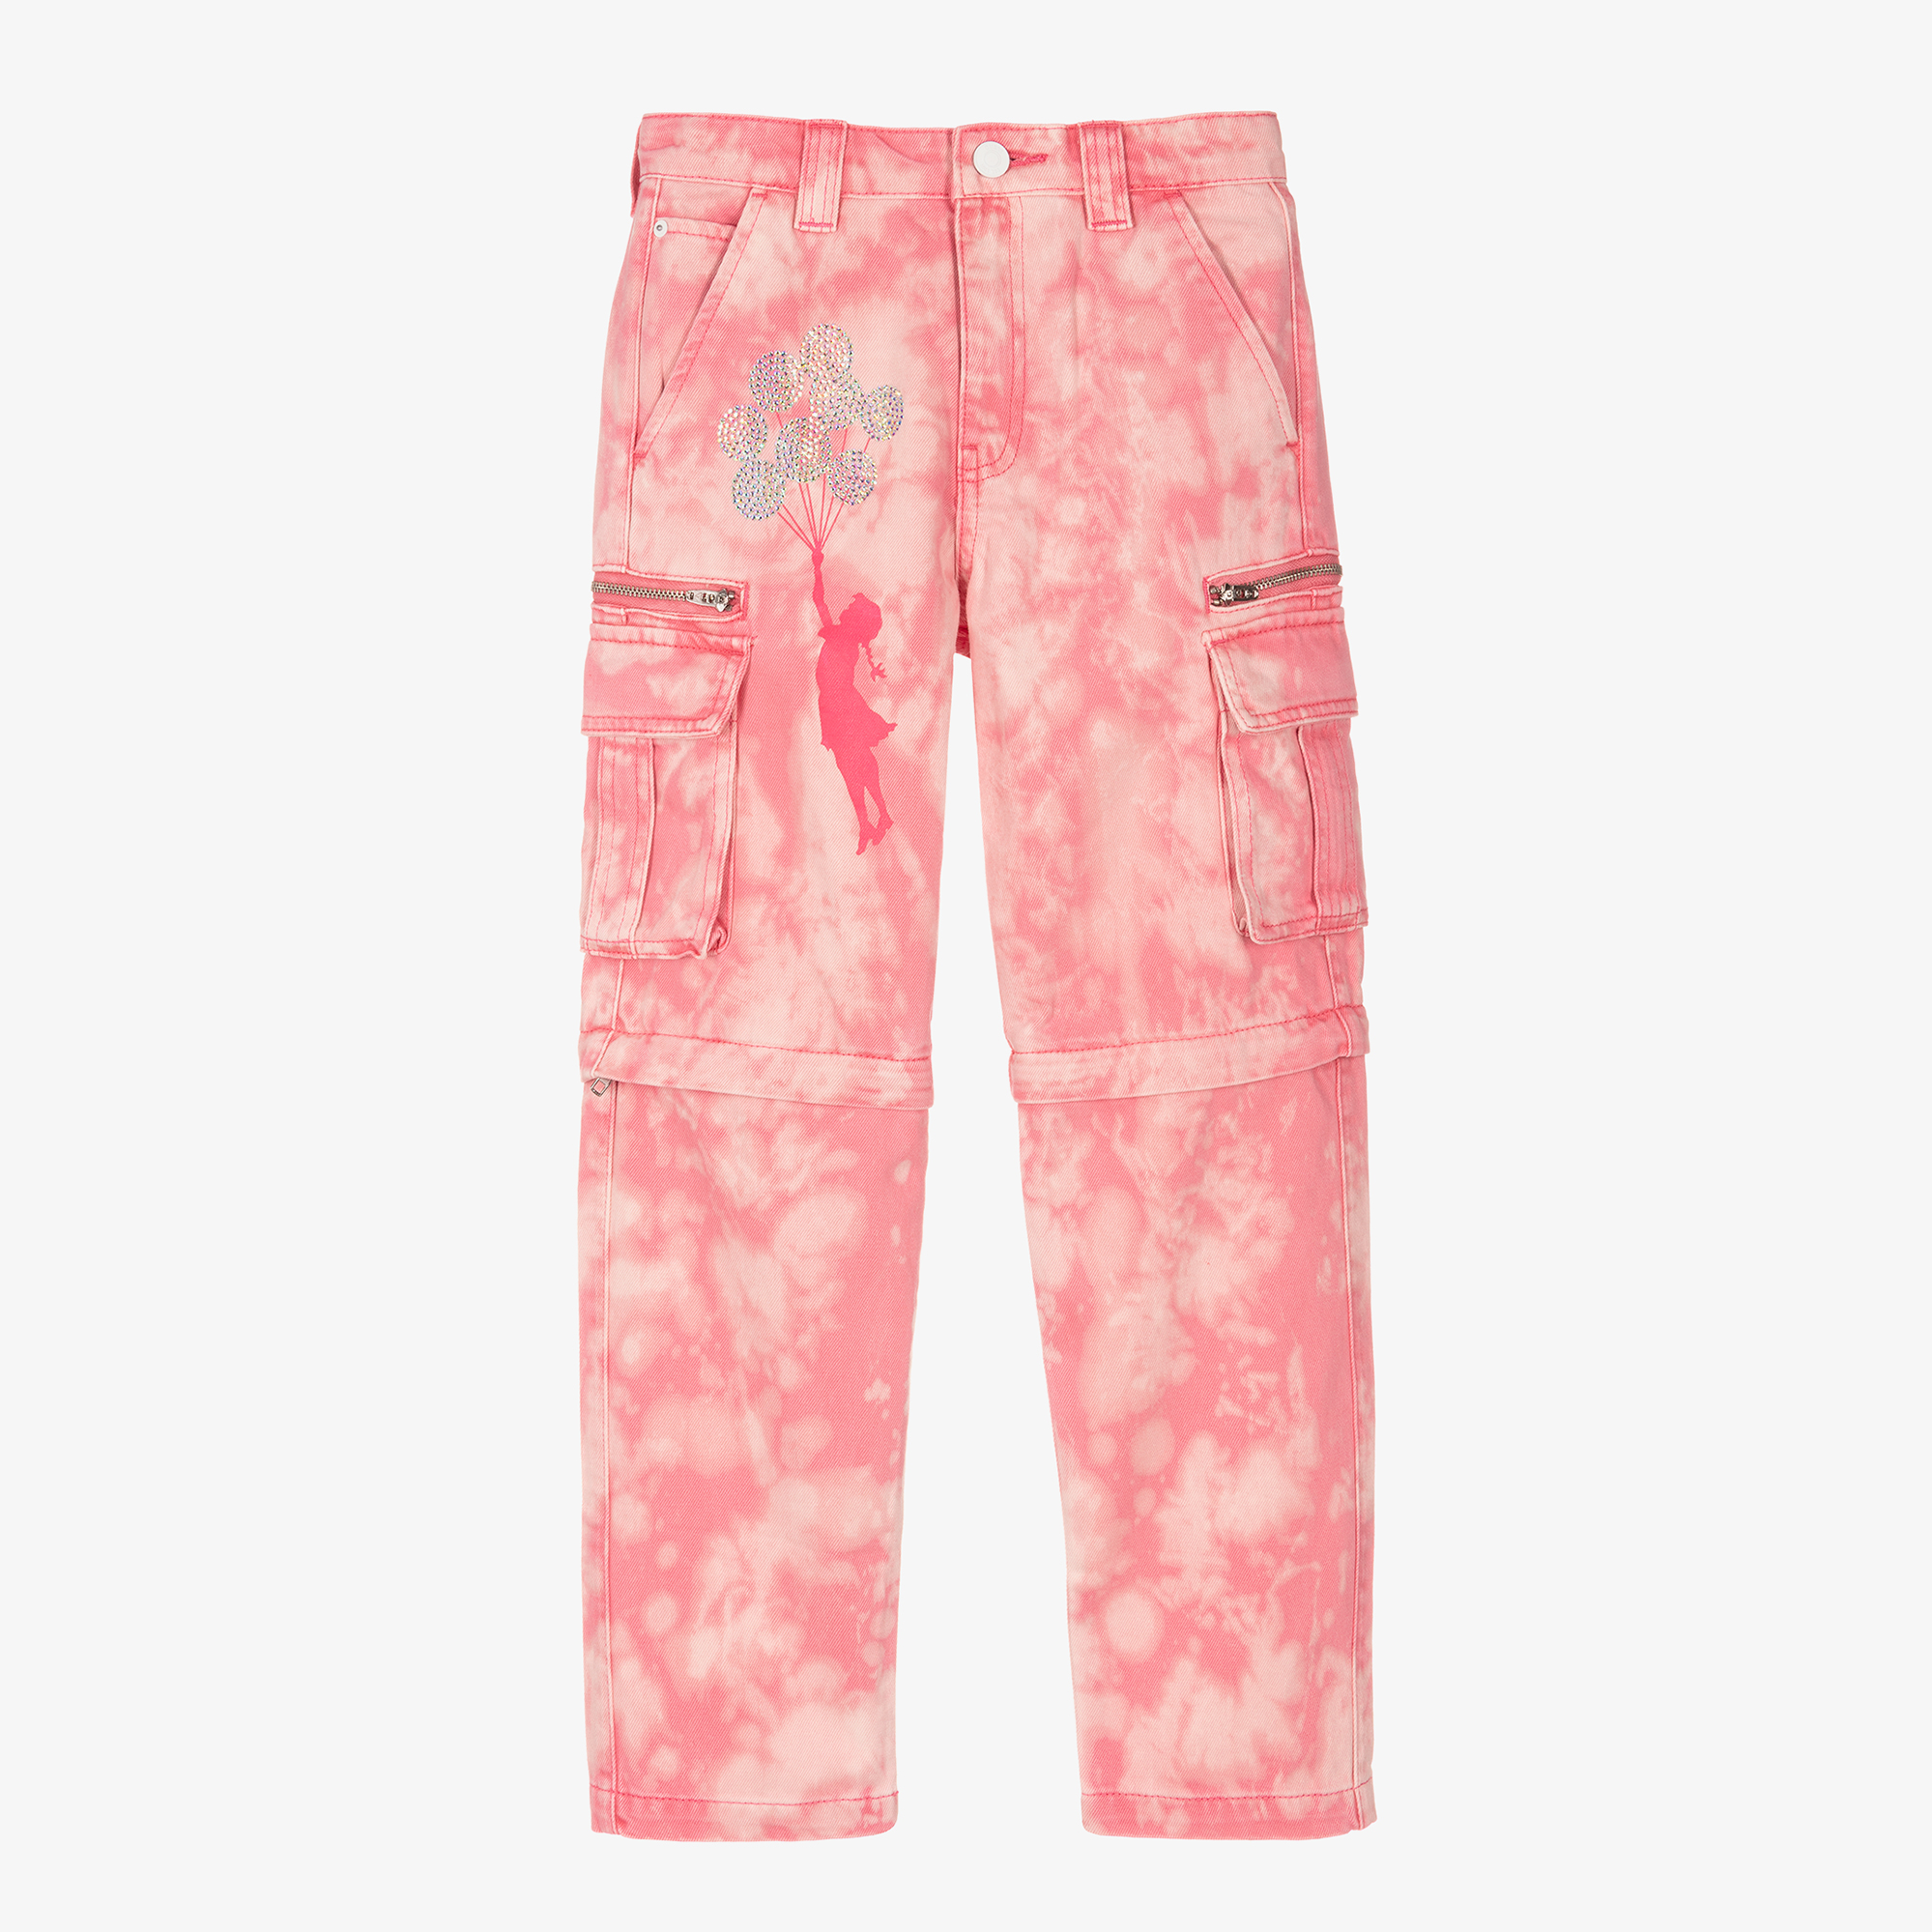 Guess - Teen Girls Pink Banksy Cargo Jeans